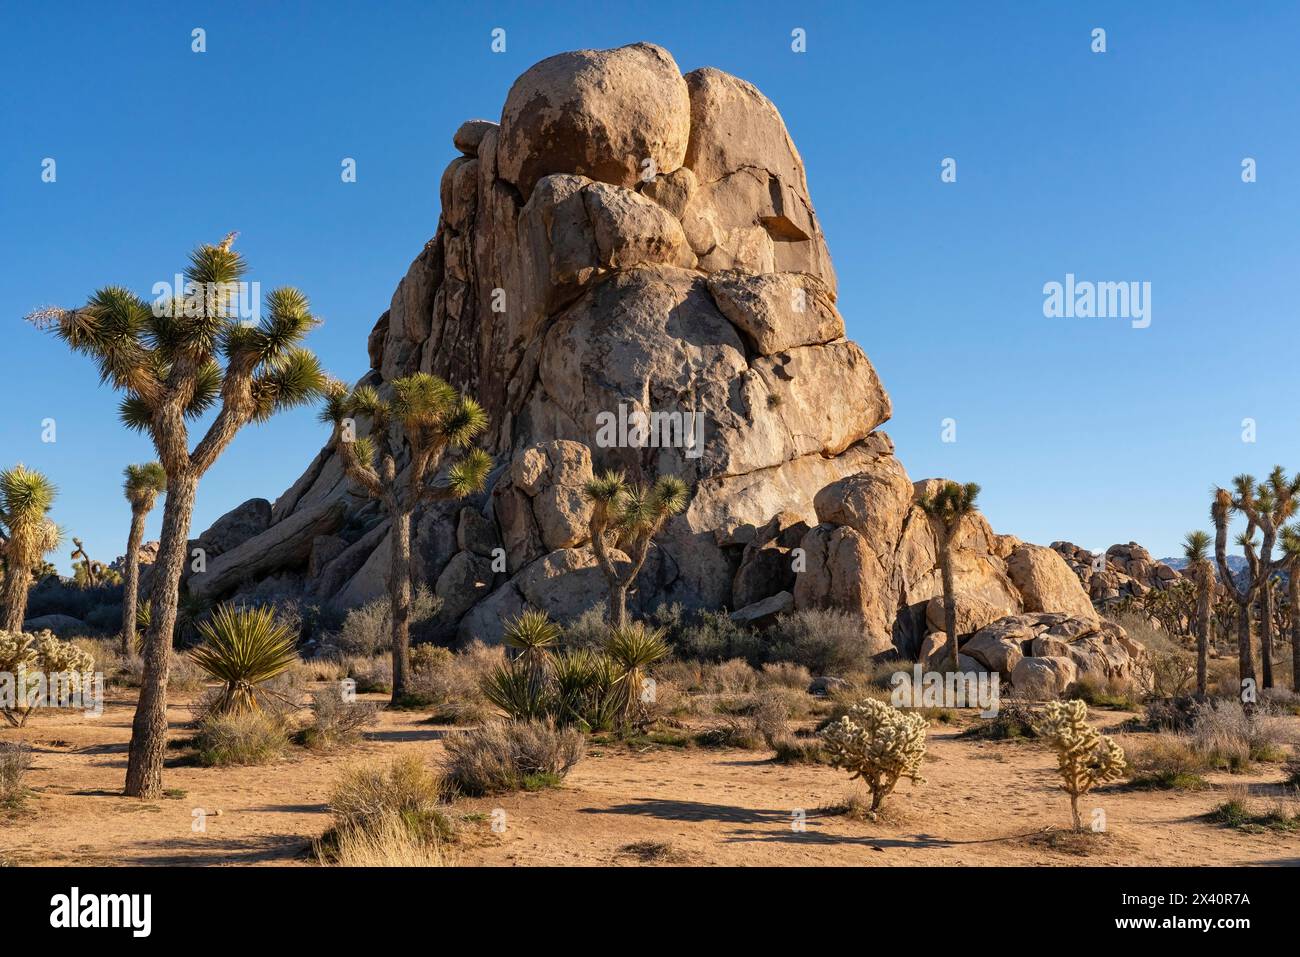 Striking rock formations in Joshua Tree National Park located in Southern California; Joshua Tree, California, United States of America Stock Photo